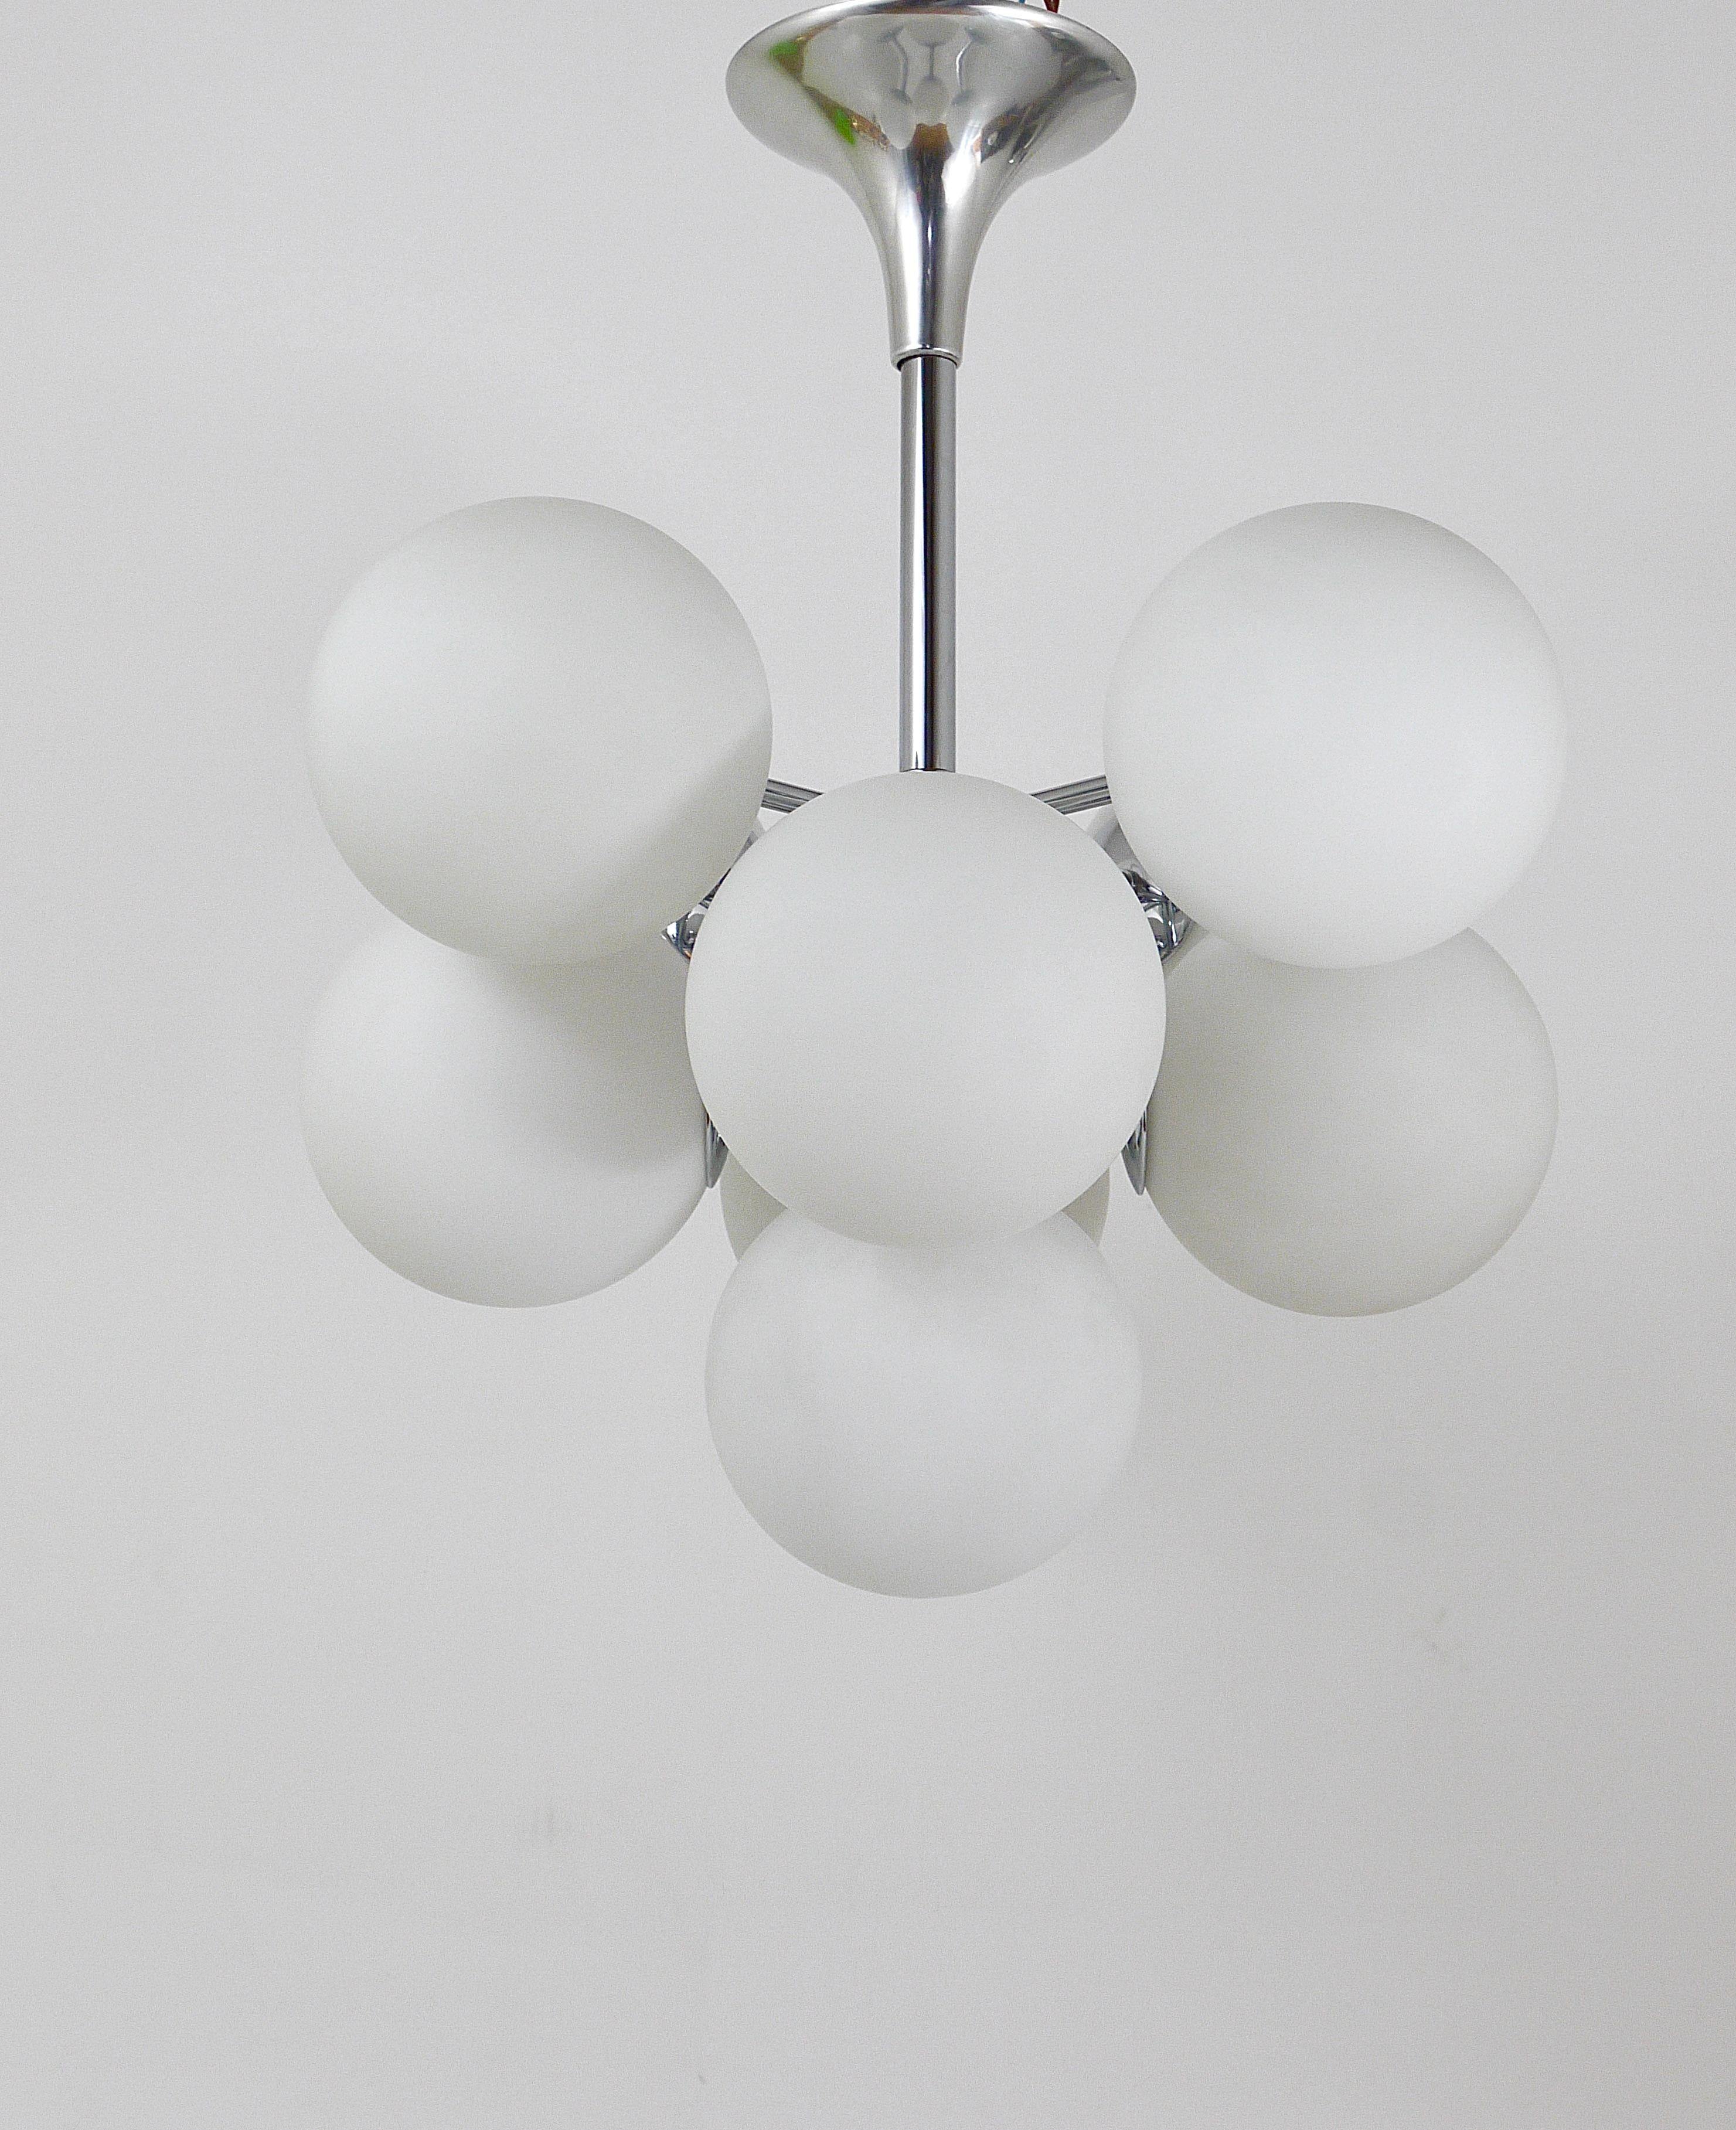 Chromed Atomic Chandelier with White Glass Globes, Temde, Switzerland For Sale 5